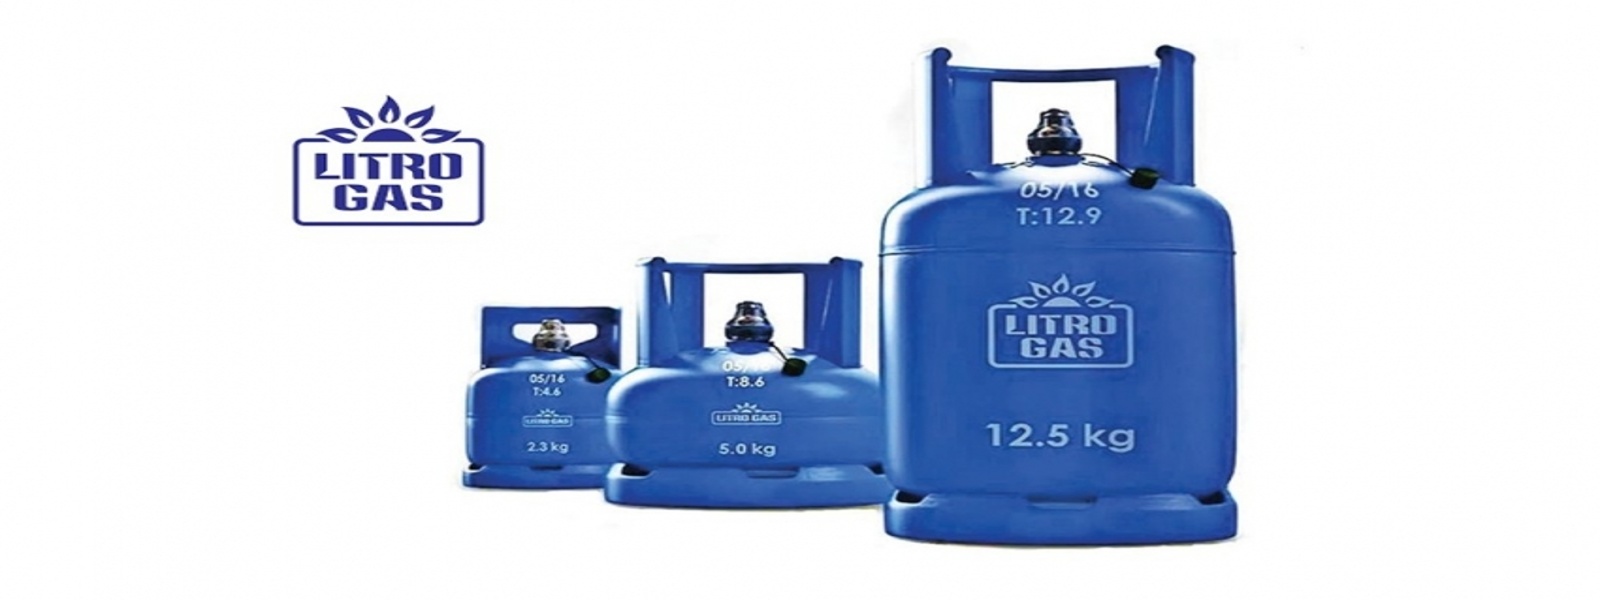 80,000 gas cylinders to be distributed today – Litro